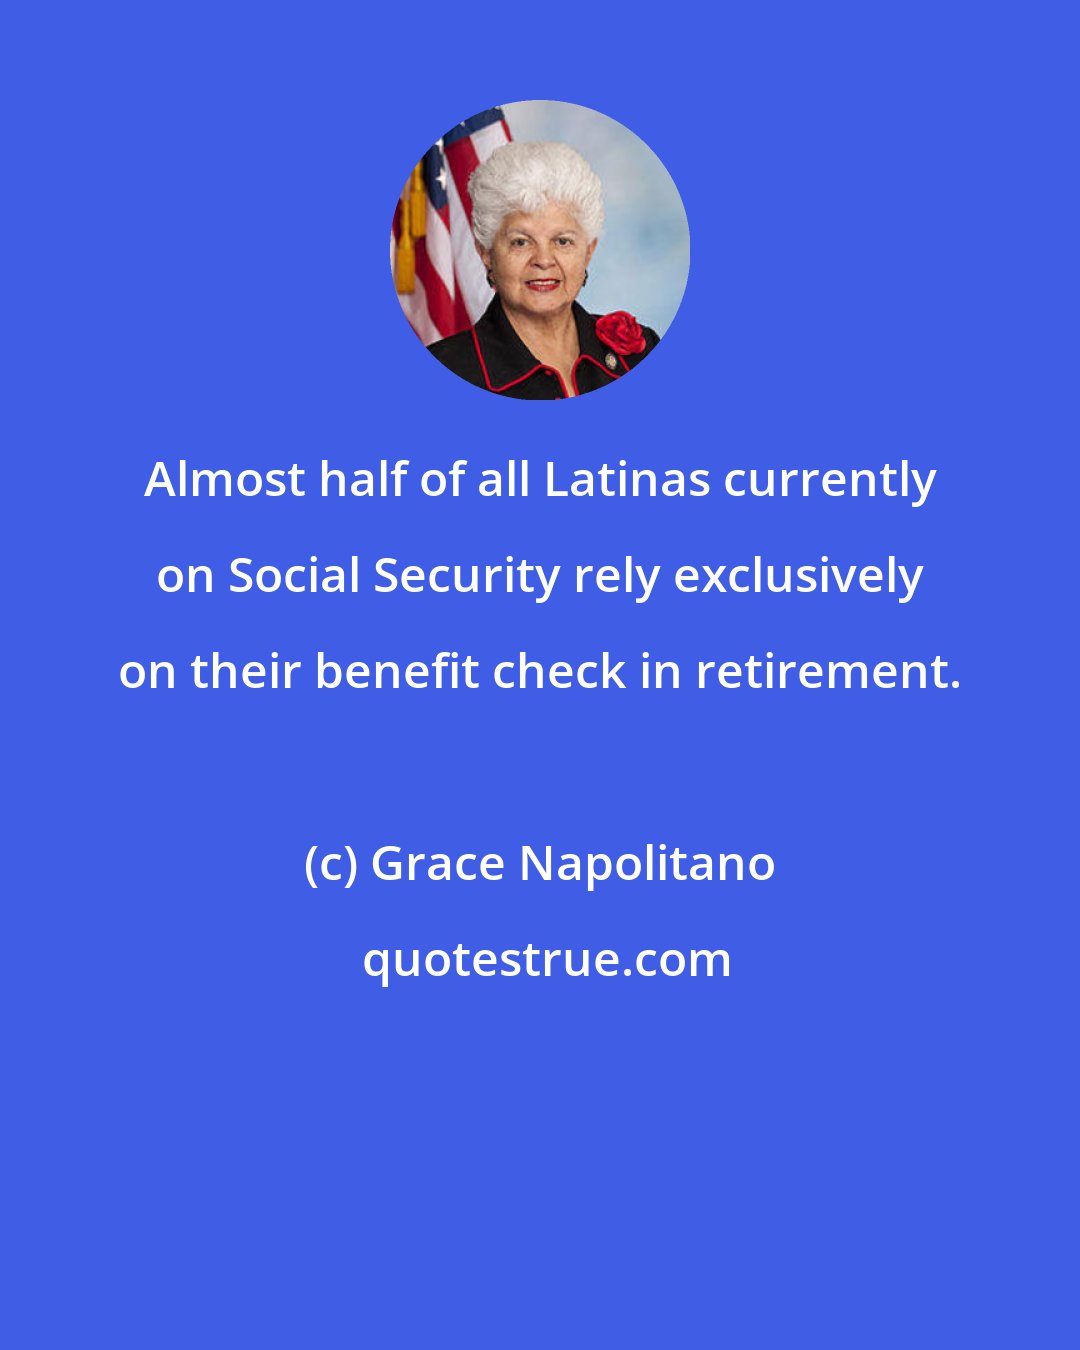 Grace Napolitano: Almost half of all Latinas currently on Social Security rely exclusively on their benefit check in retirement.